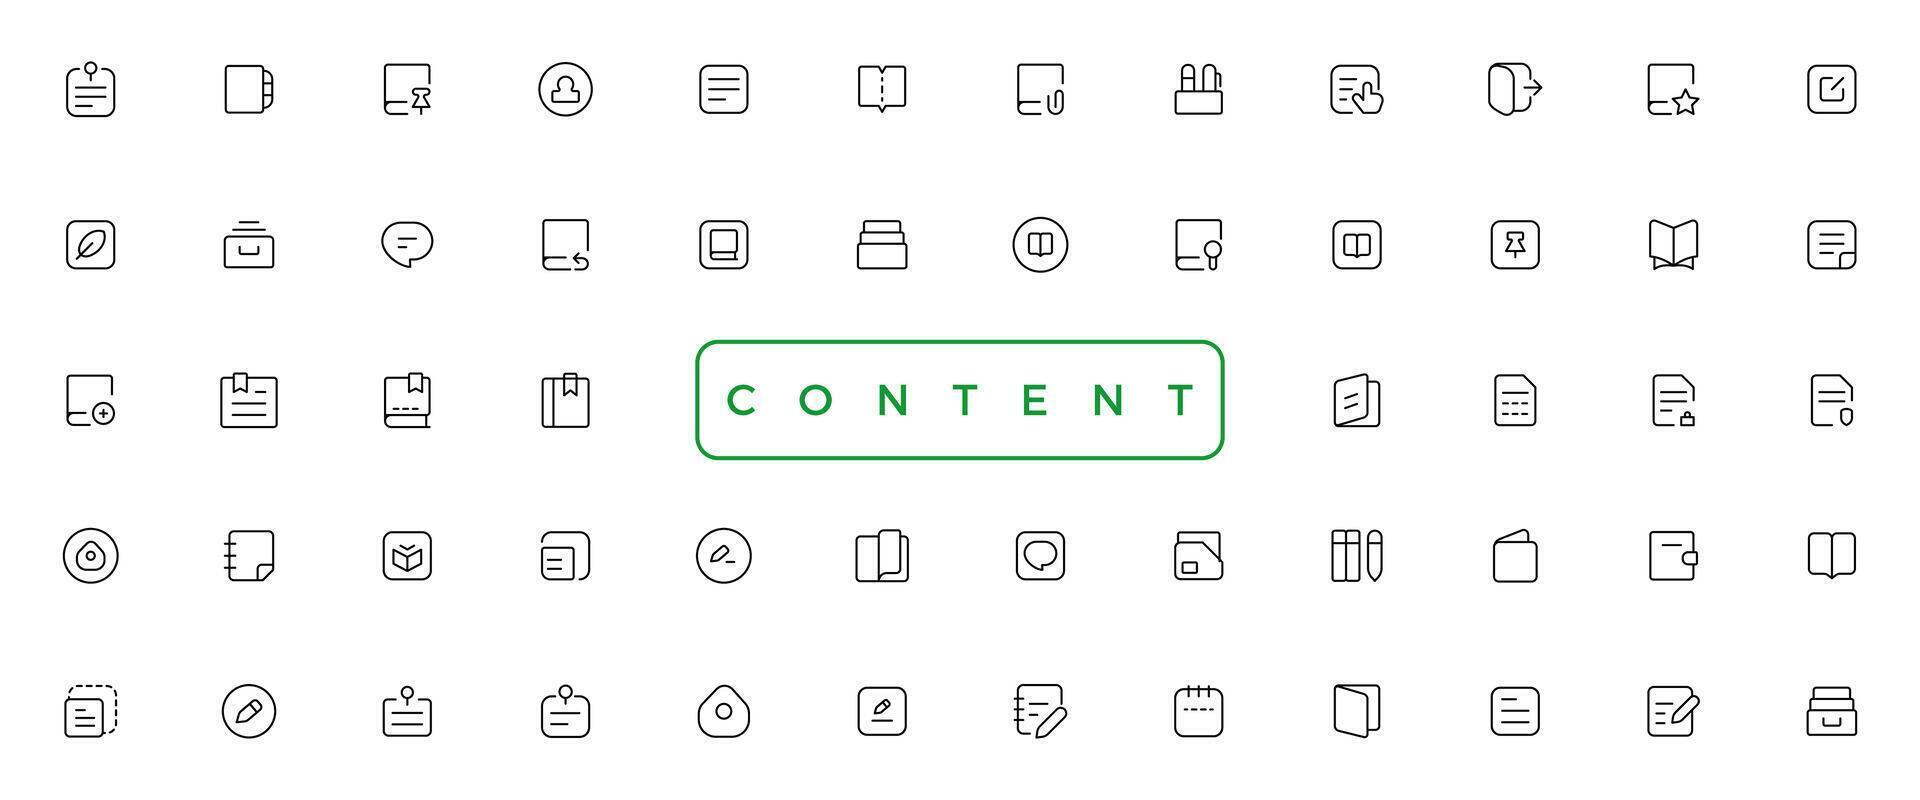 content simple concept icons set. Contains such icons as vector image, media, video, social content and more, can be used for web, logo, UI or UX